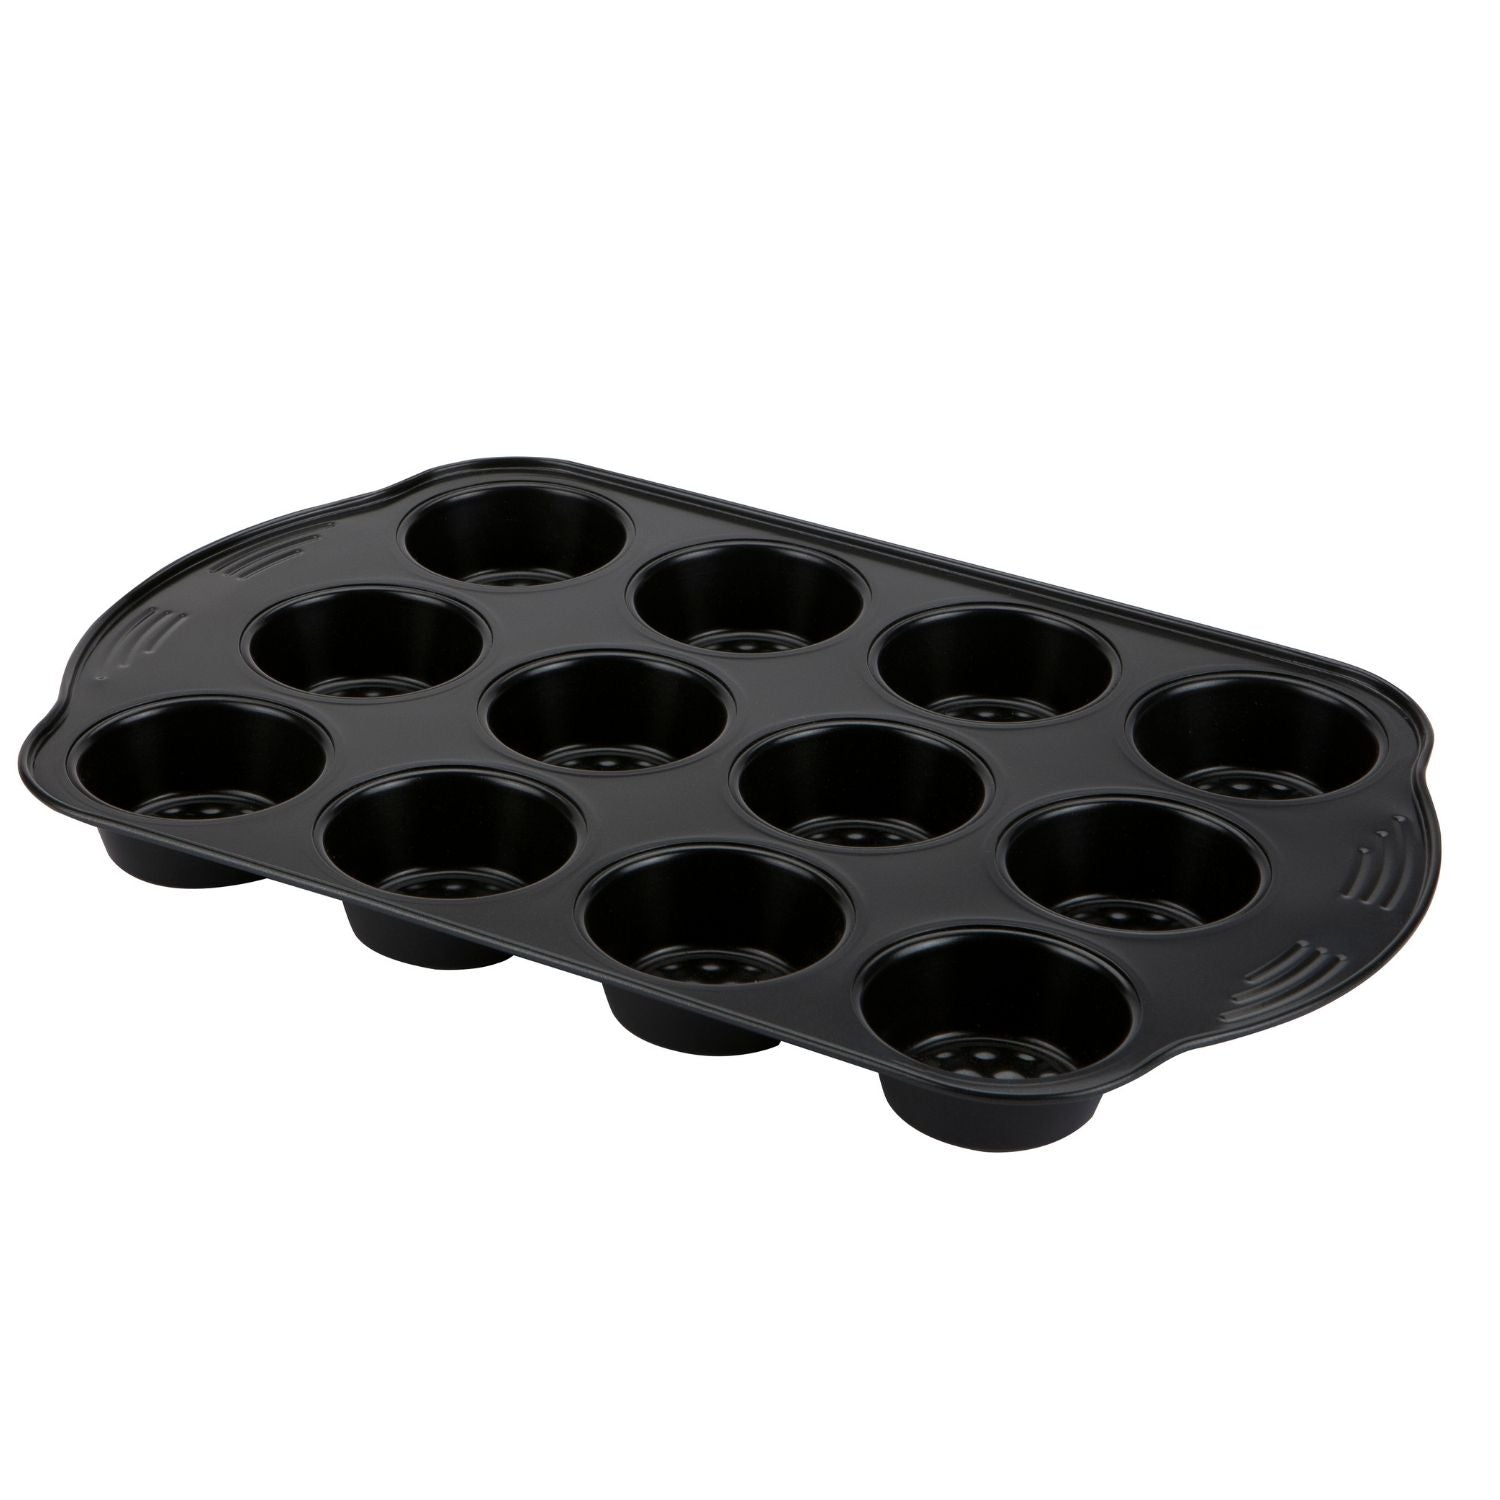 Meyers Bakeware Muffin Tin 12 Cup 1 Shaws Department Stores